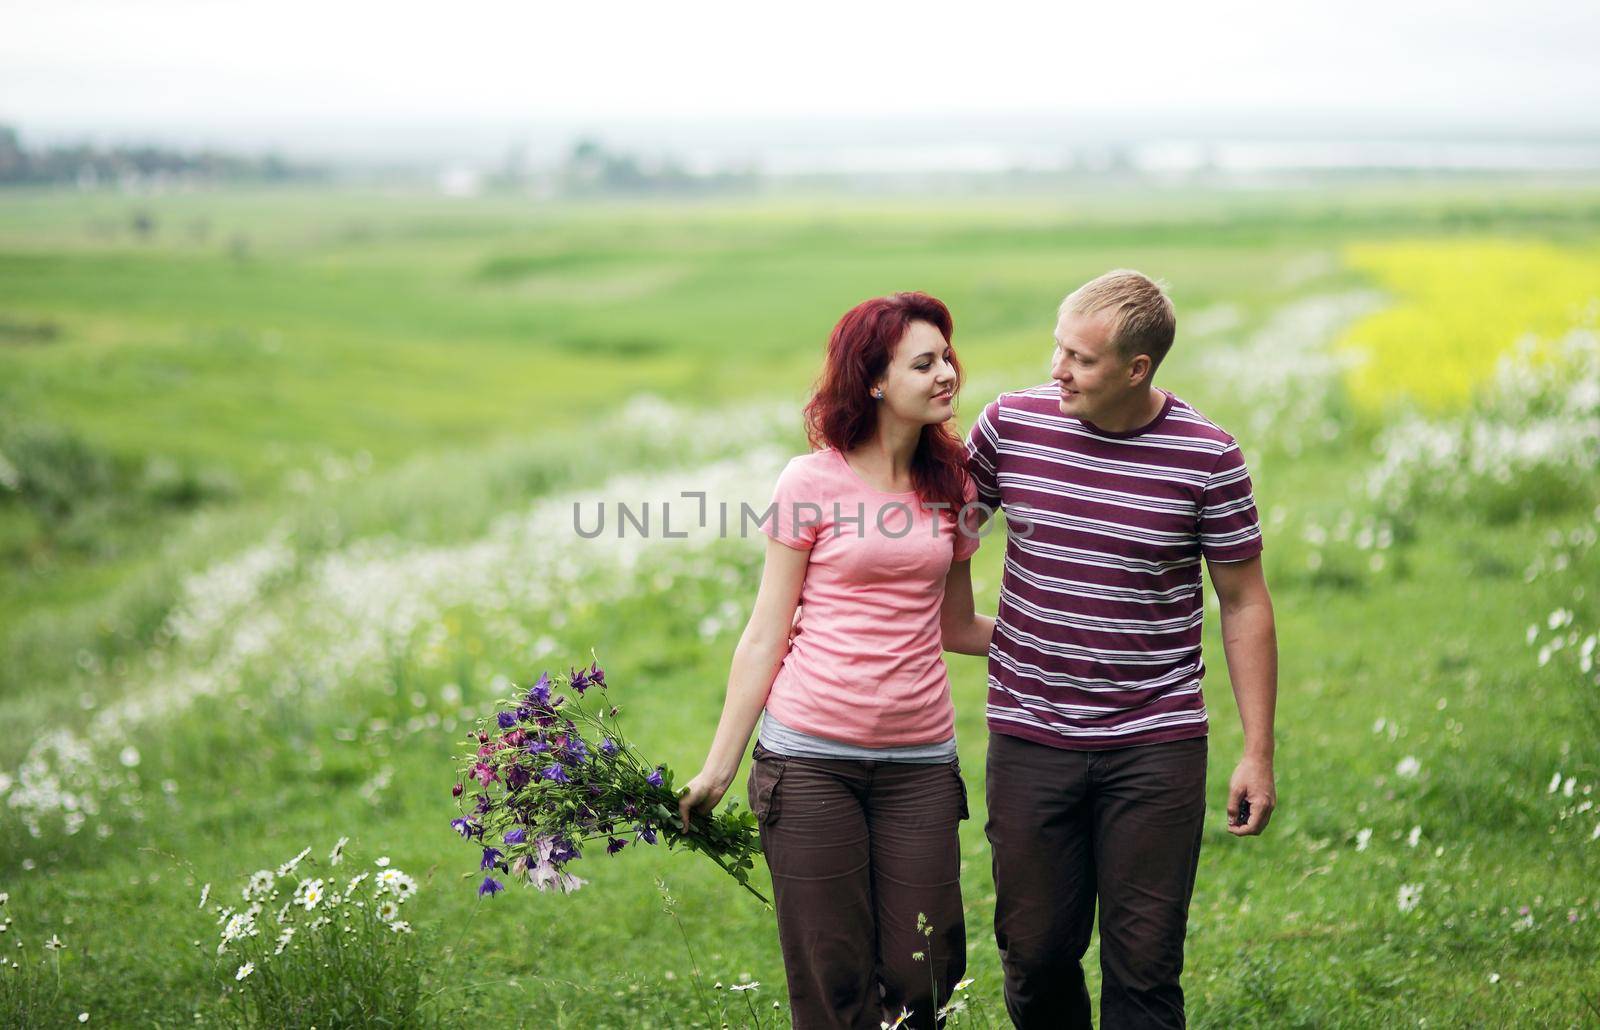 Couple in love guy and girl in a field of white daisies and green grass by selinsmo